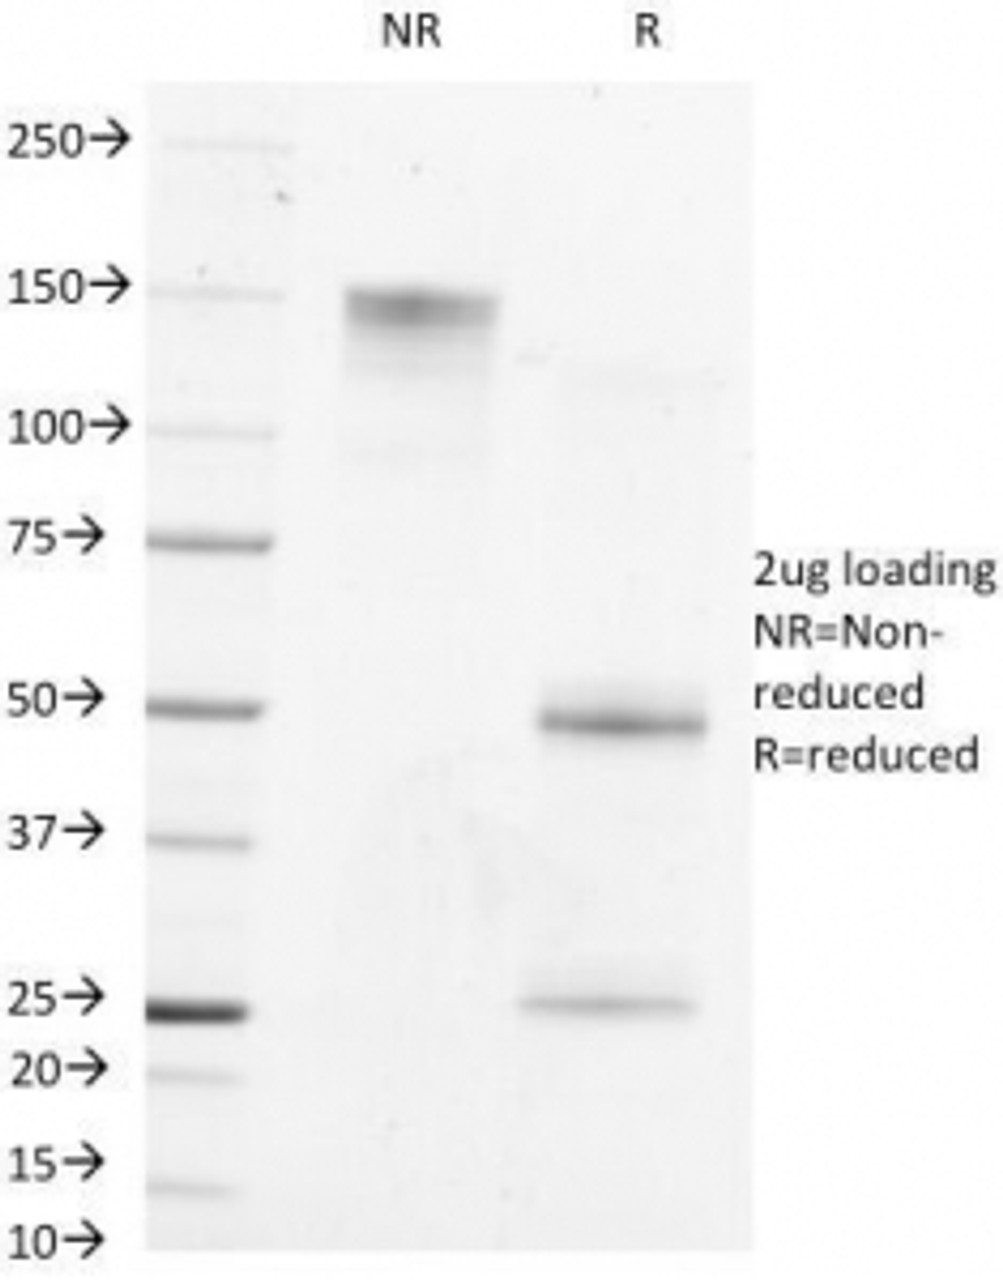 SDS-PAGE Analysis of Purified, BSA-Free AFP Antibody (clone MBS-12) . Confirmation of Integrity and Purity of the Antibody.